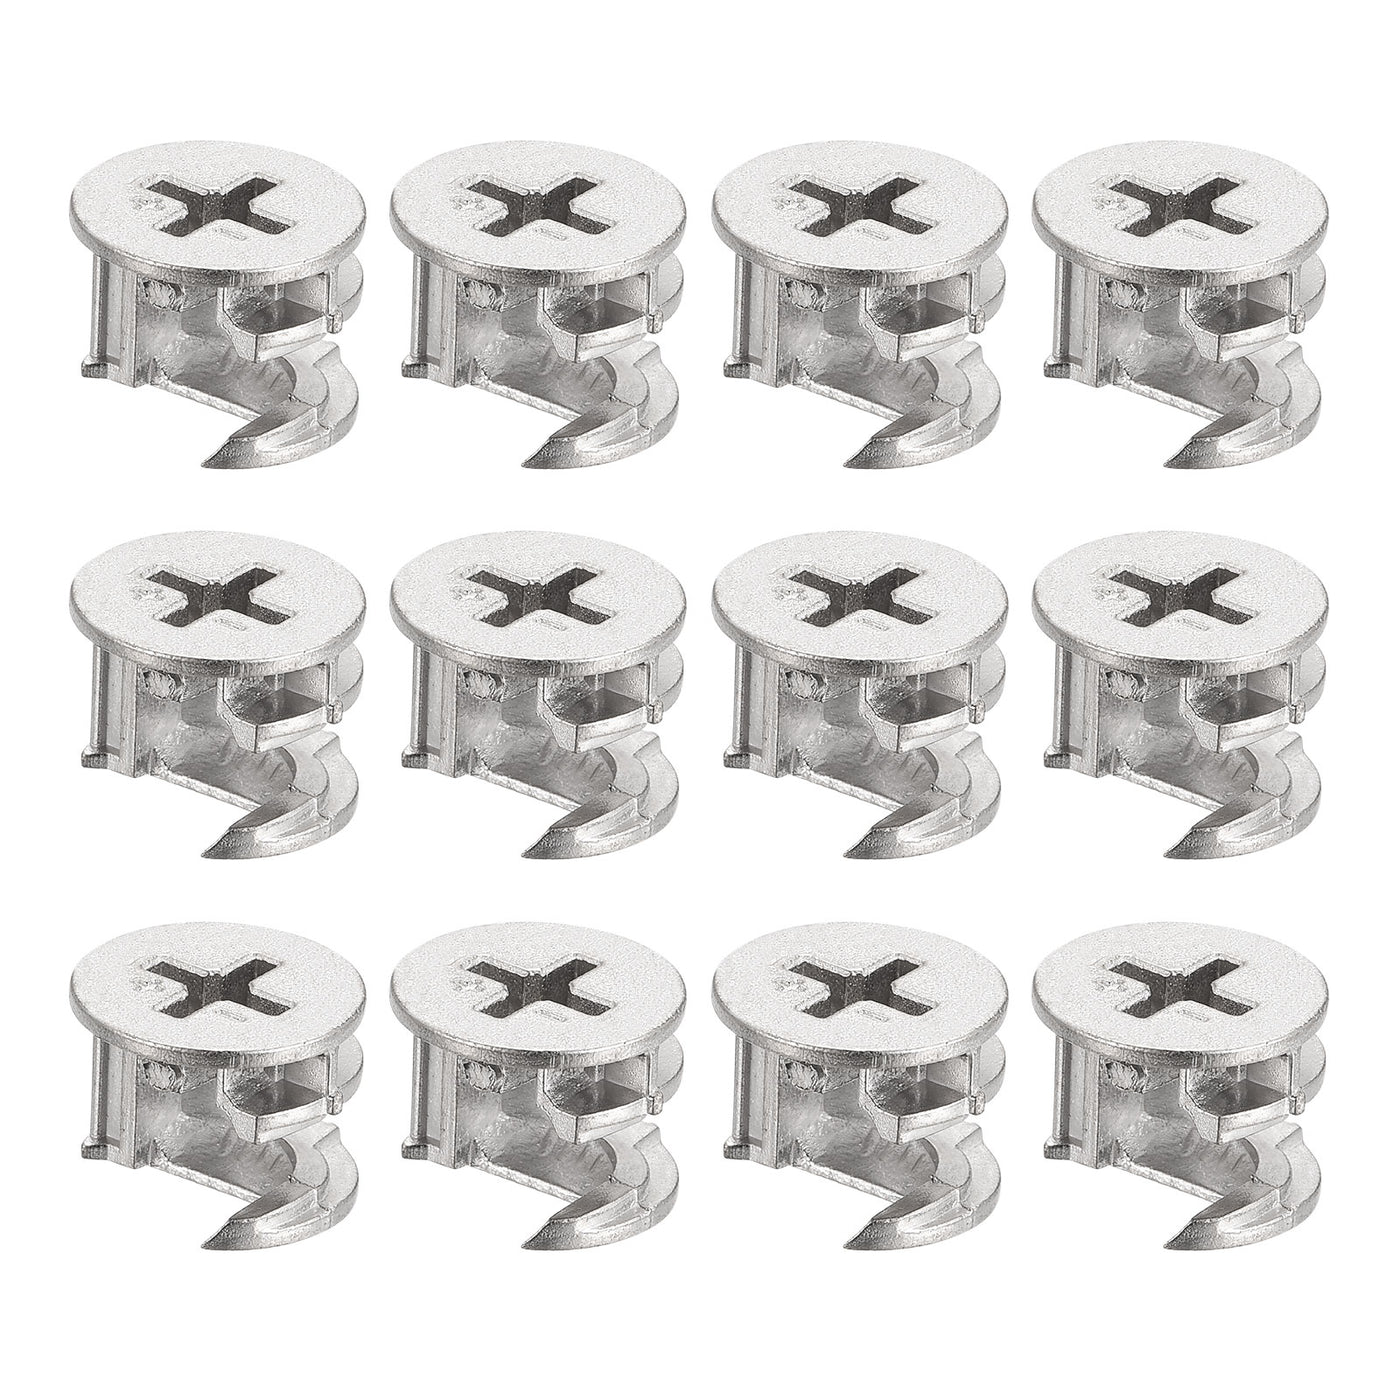 Uxcell Uxcell Cam Lock Nut for Furniture 80pcs 14.6x11.5mm Joint Connector Locking Nuts